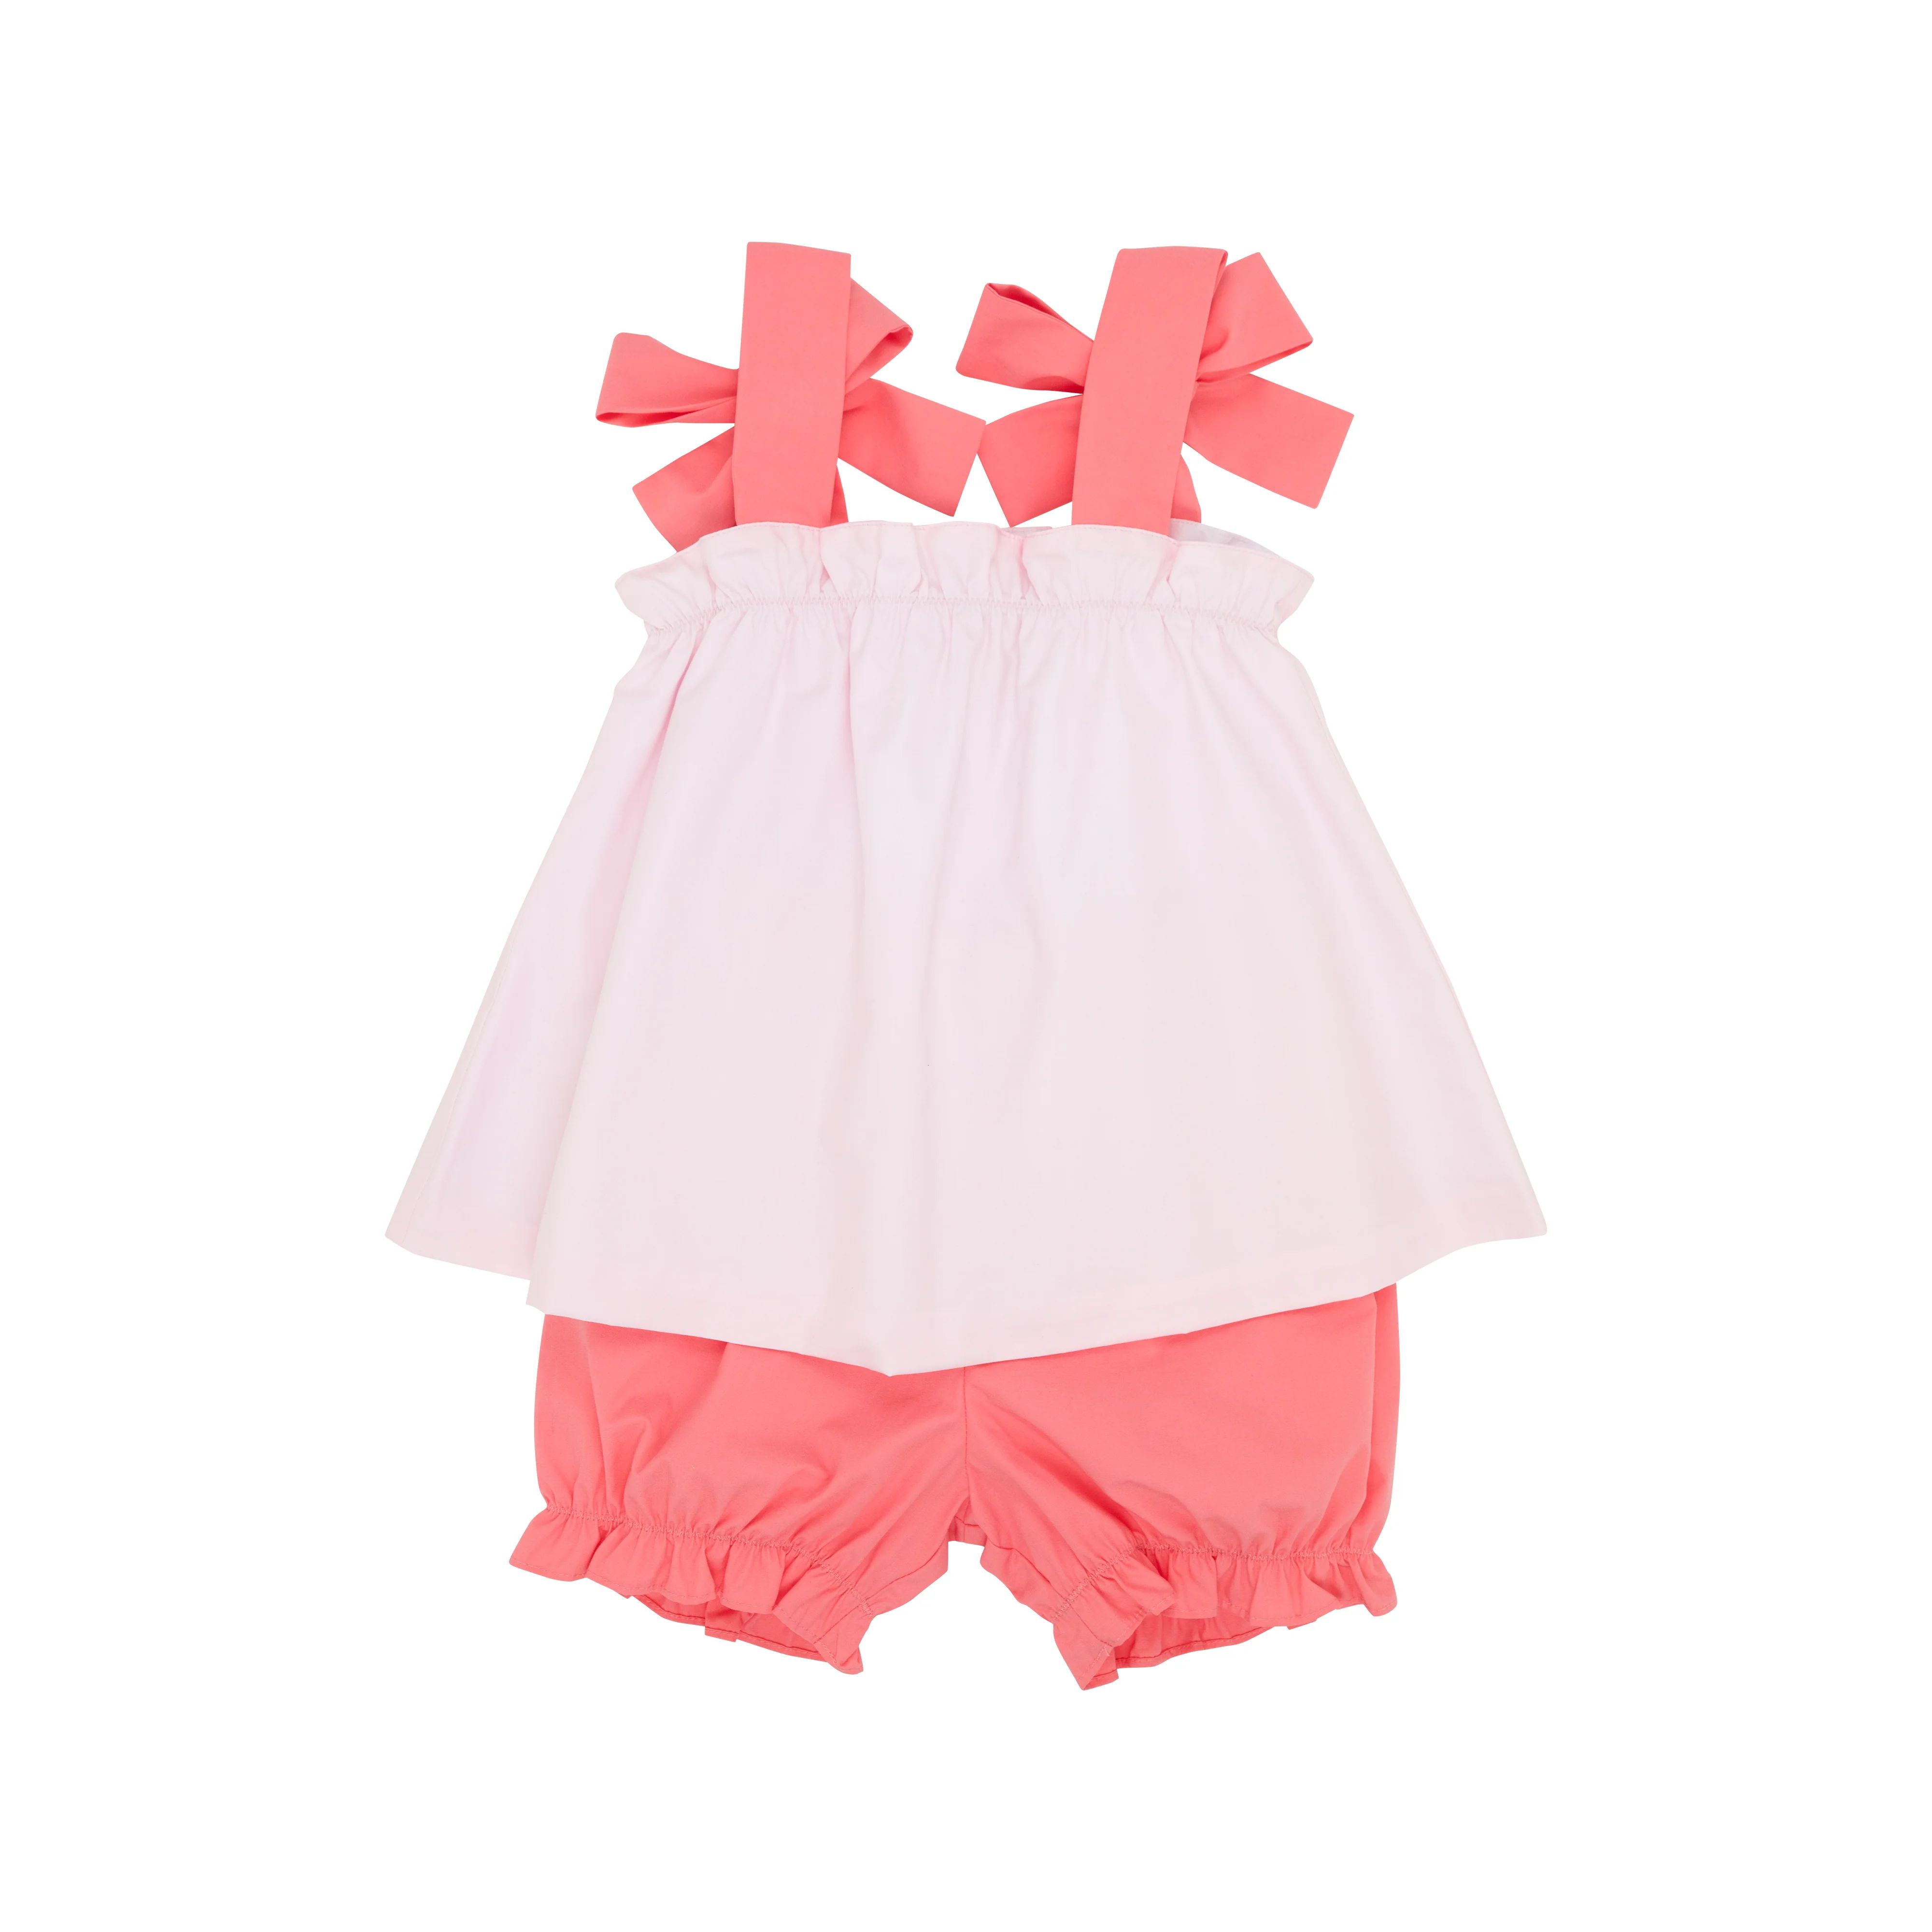 Lainey's Little Set - Palm Beach Pink with Parrot Cay Coral | The Beaufort Bonnet Company